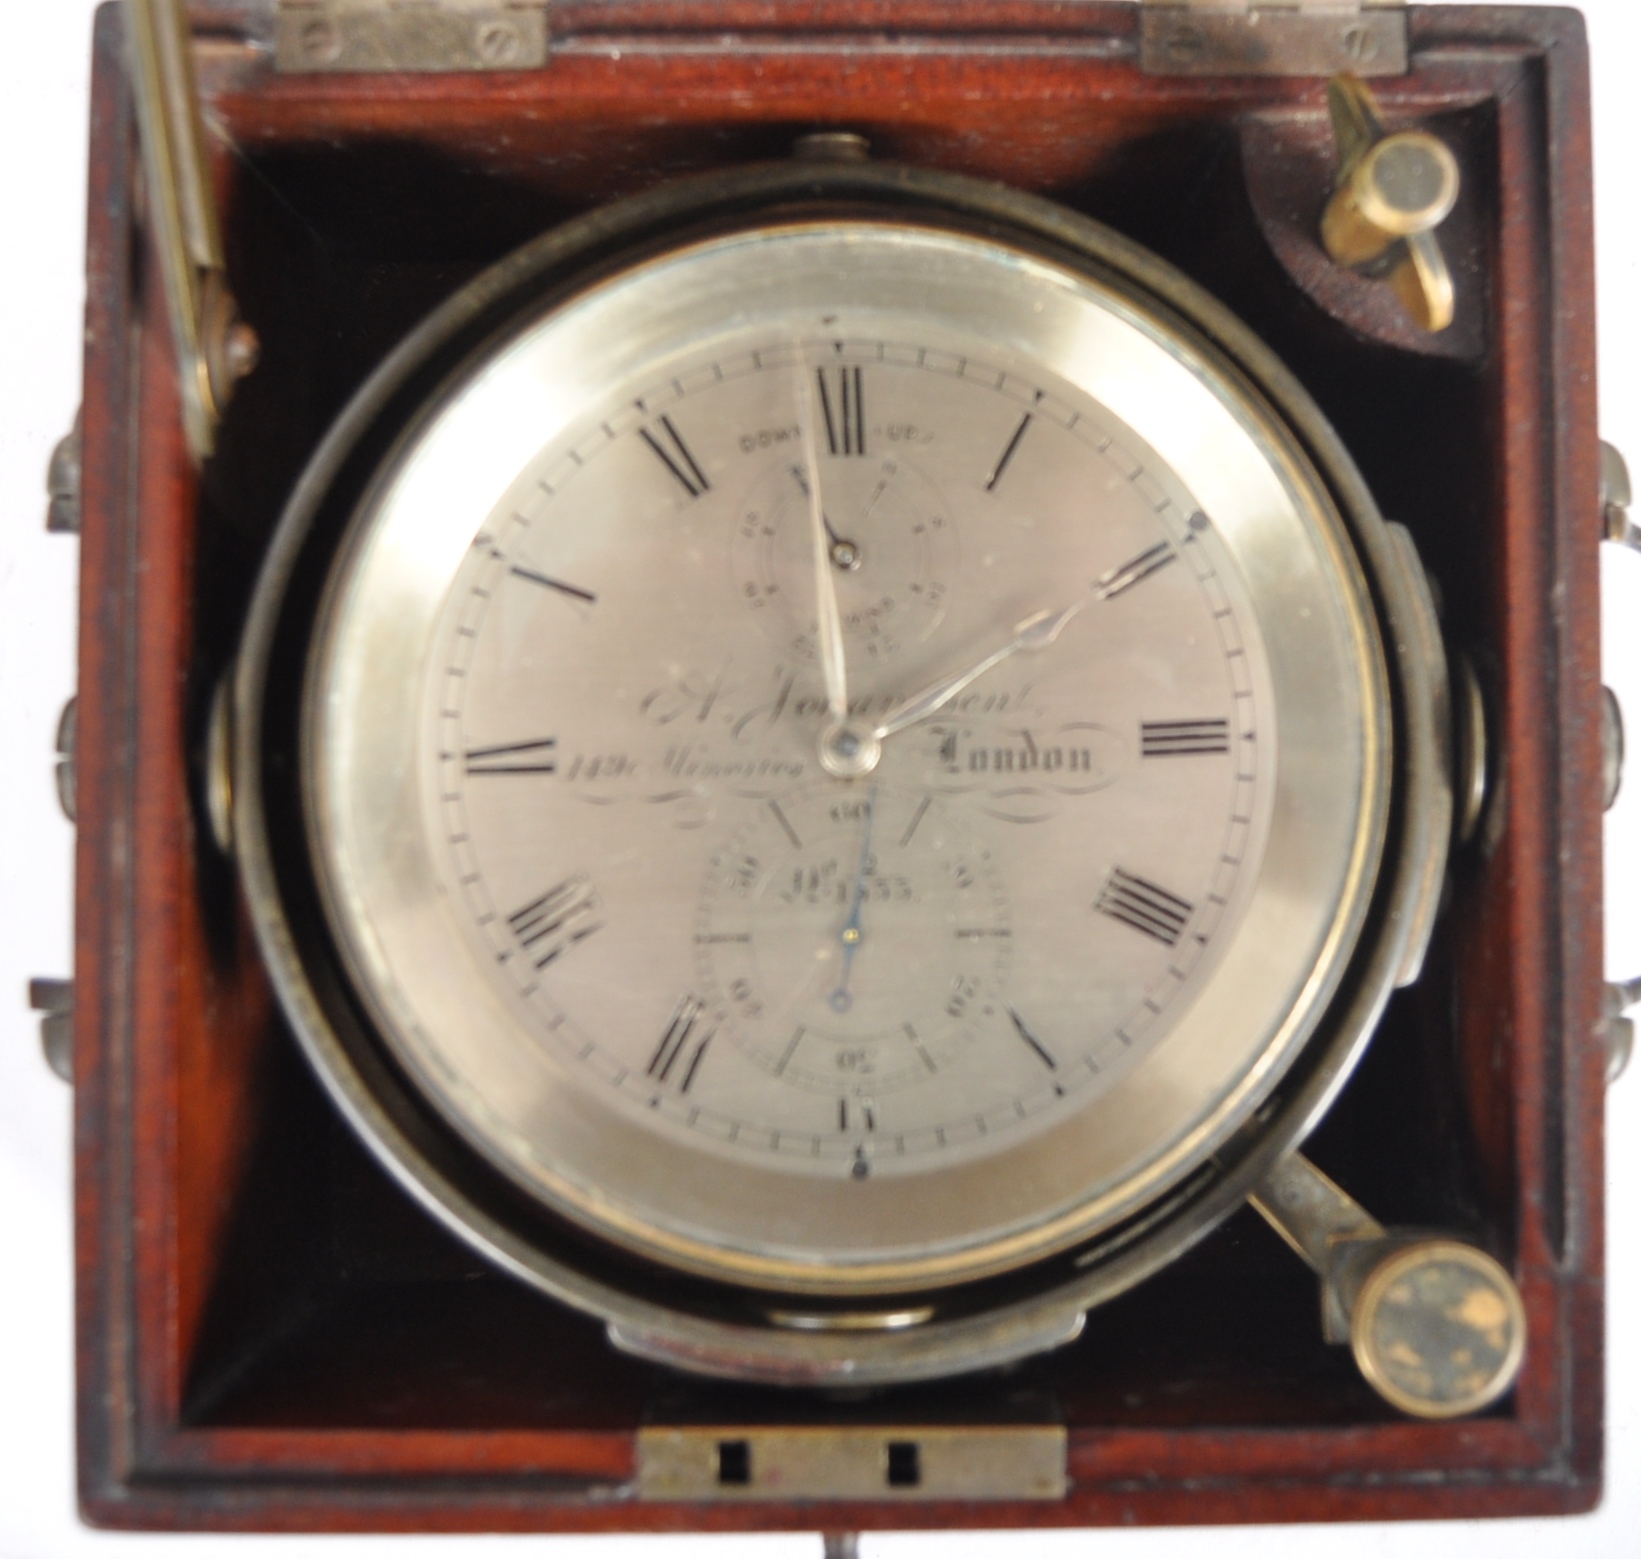 A TWO-DAY MARINE CHRONOMETER BY A. JOHANNSEN & CO